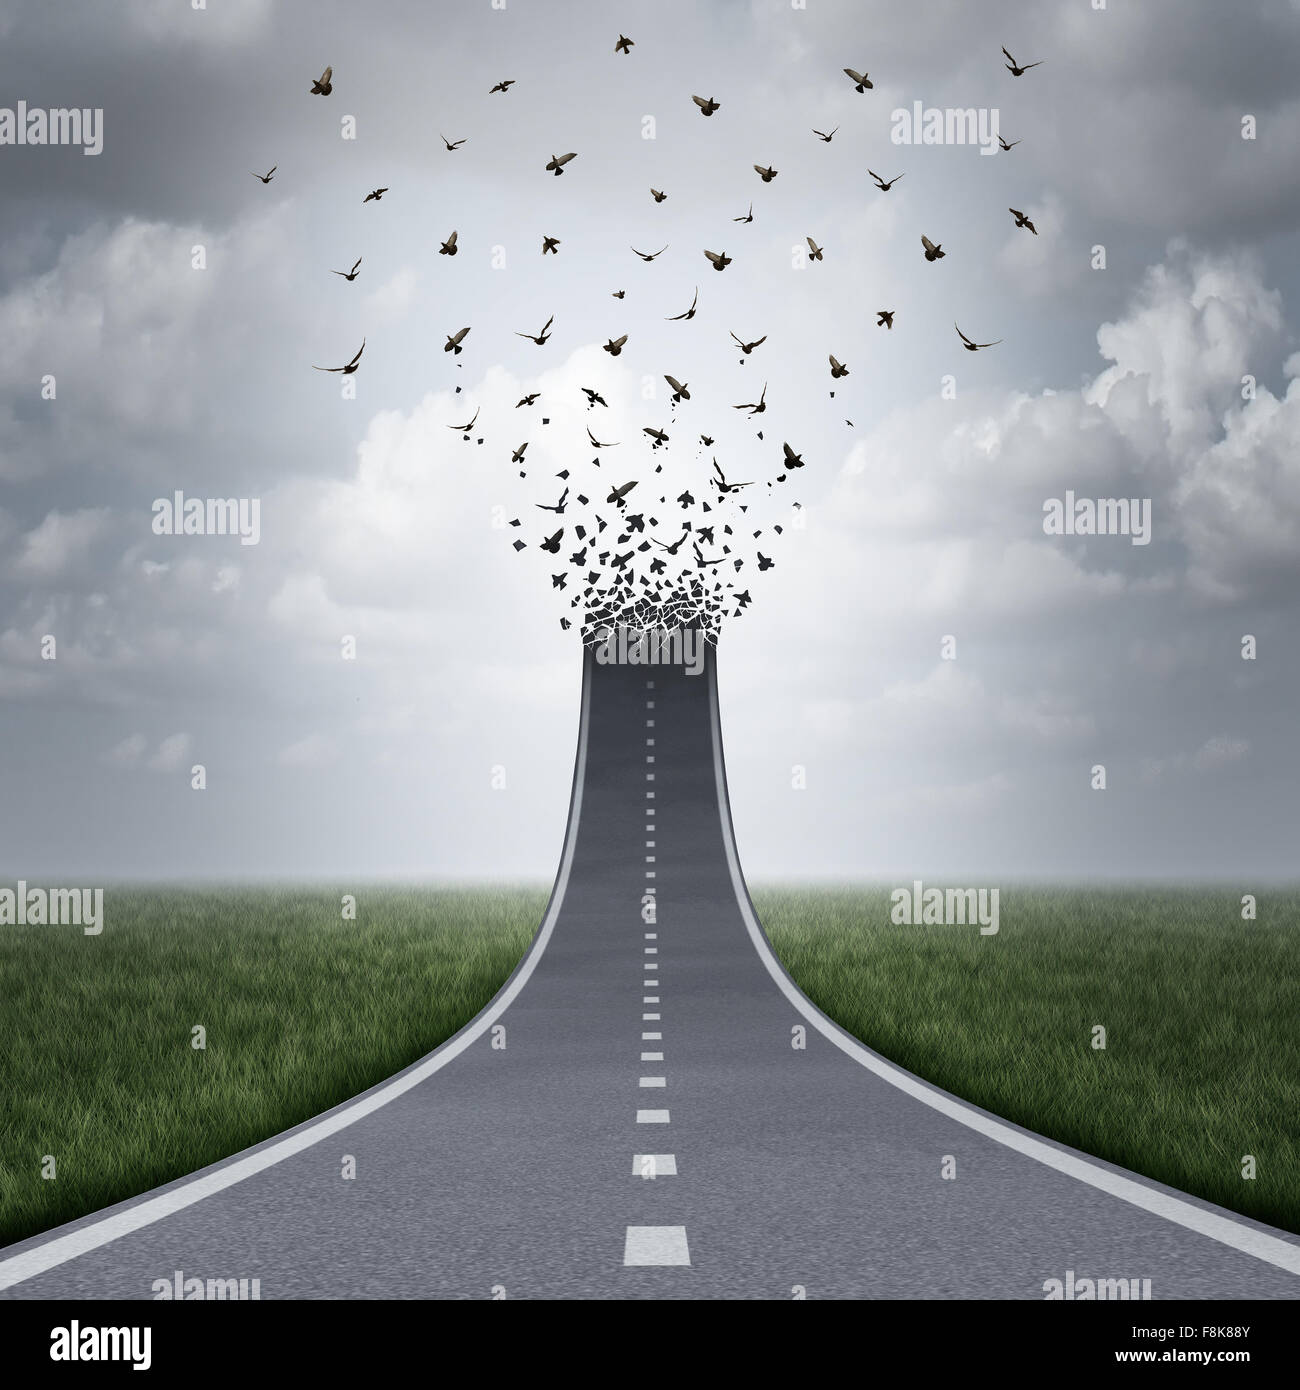 Driving freedom concept as a road or highway going up and transforming into flying birds as a business metaphor for success or life motivation as a path to liberty or heaven. Stock Photo